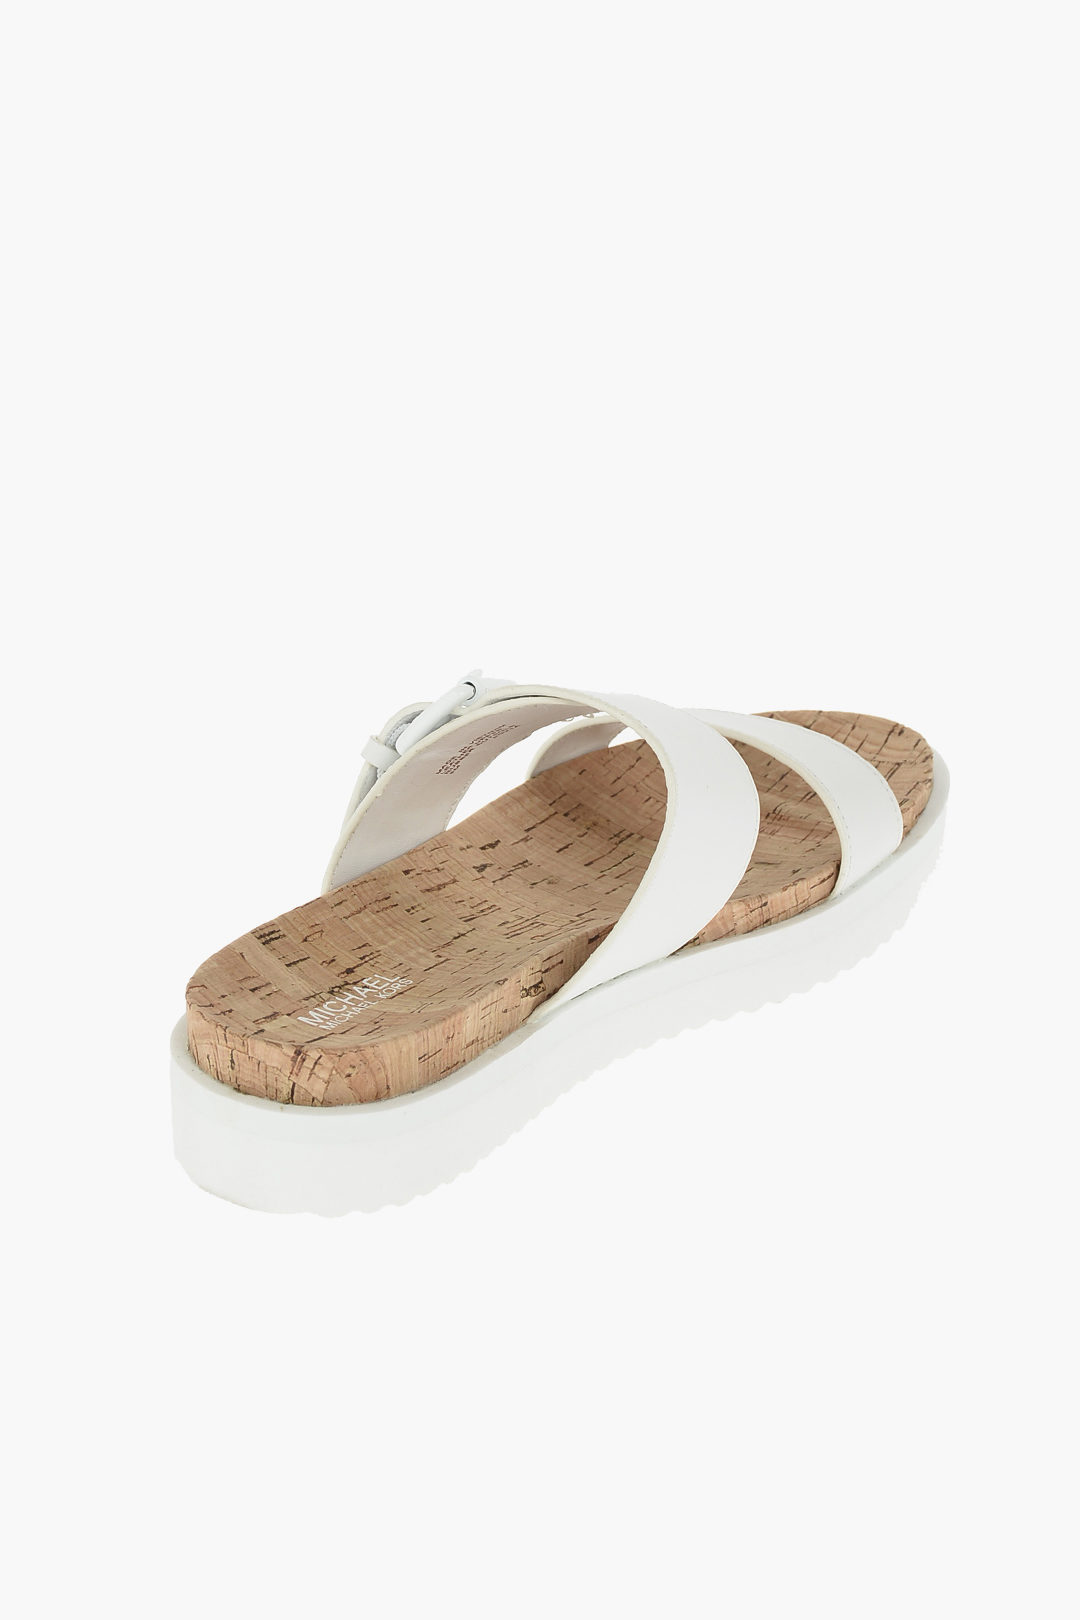 Michael Kors Cork Sole BO Leather Slippers women - Glamood Outlet